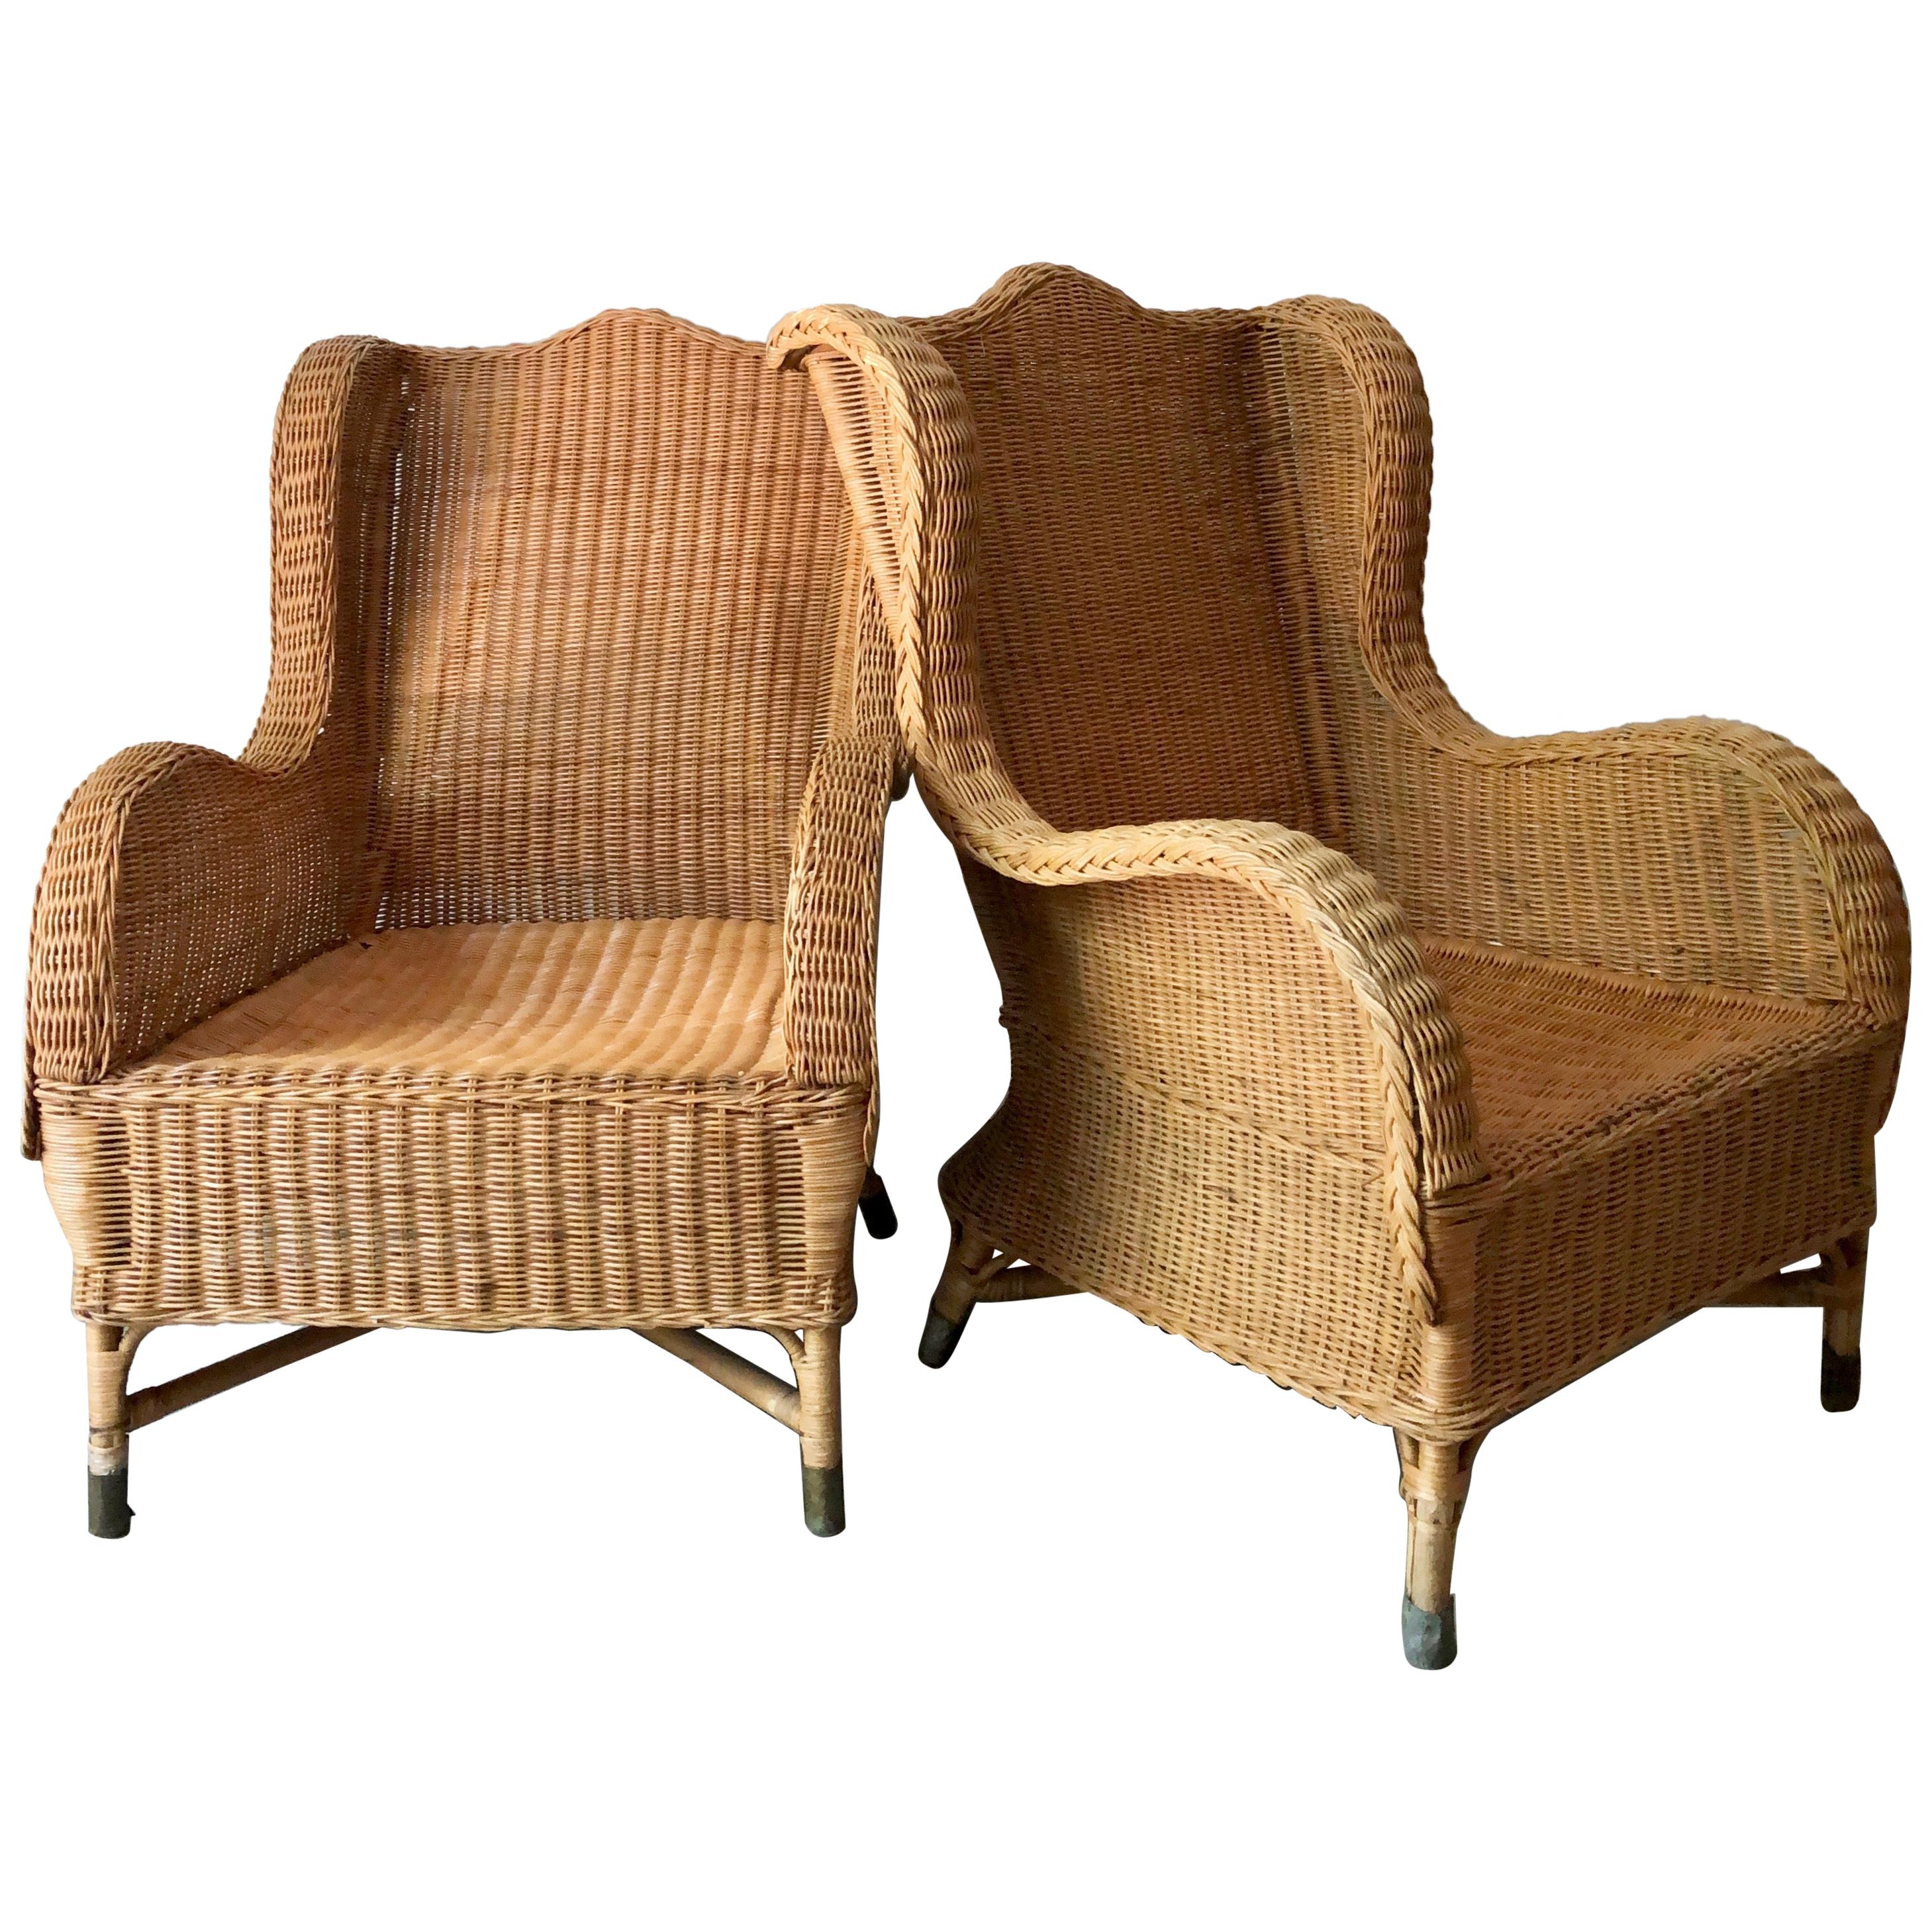 Pair of Antique French Wicker/Rattan Lounge Armchairs